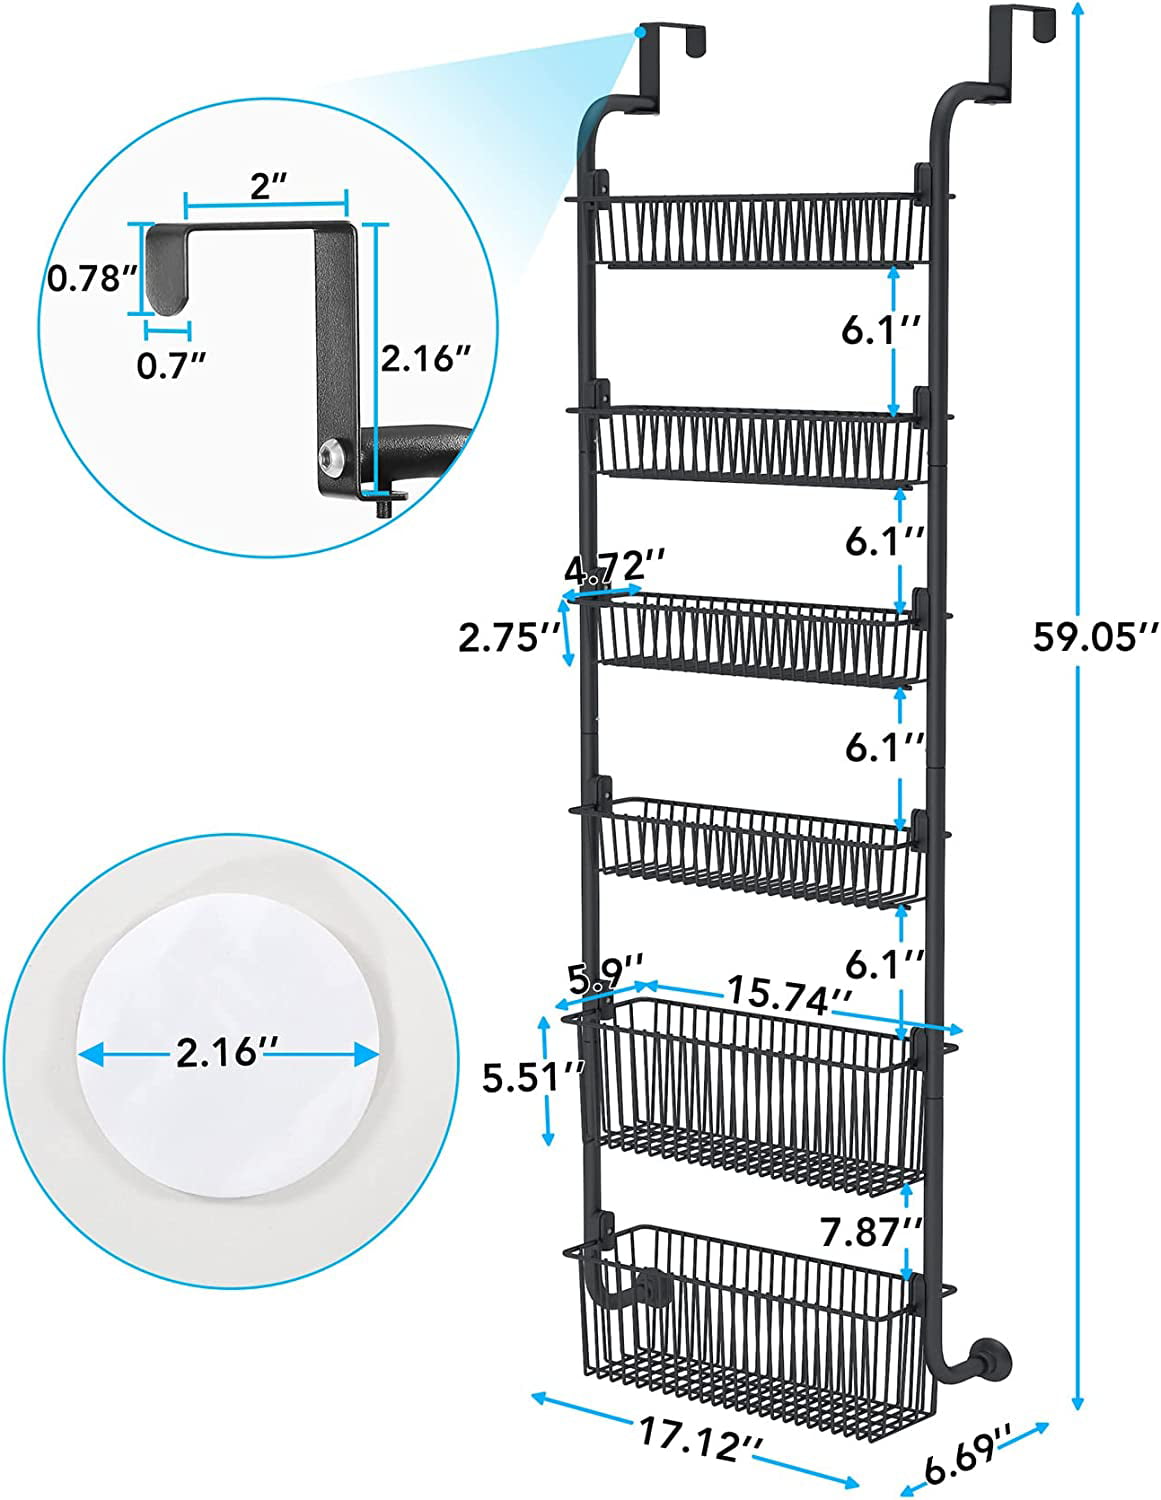 Mefirt Over The Door Pantry Organizer, Pantry Hanging Storage and  Organization, 6 Adjustable Baskets Heavy-Duty Metal Wall Mount Spice Rack  for